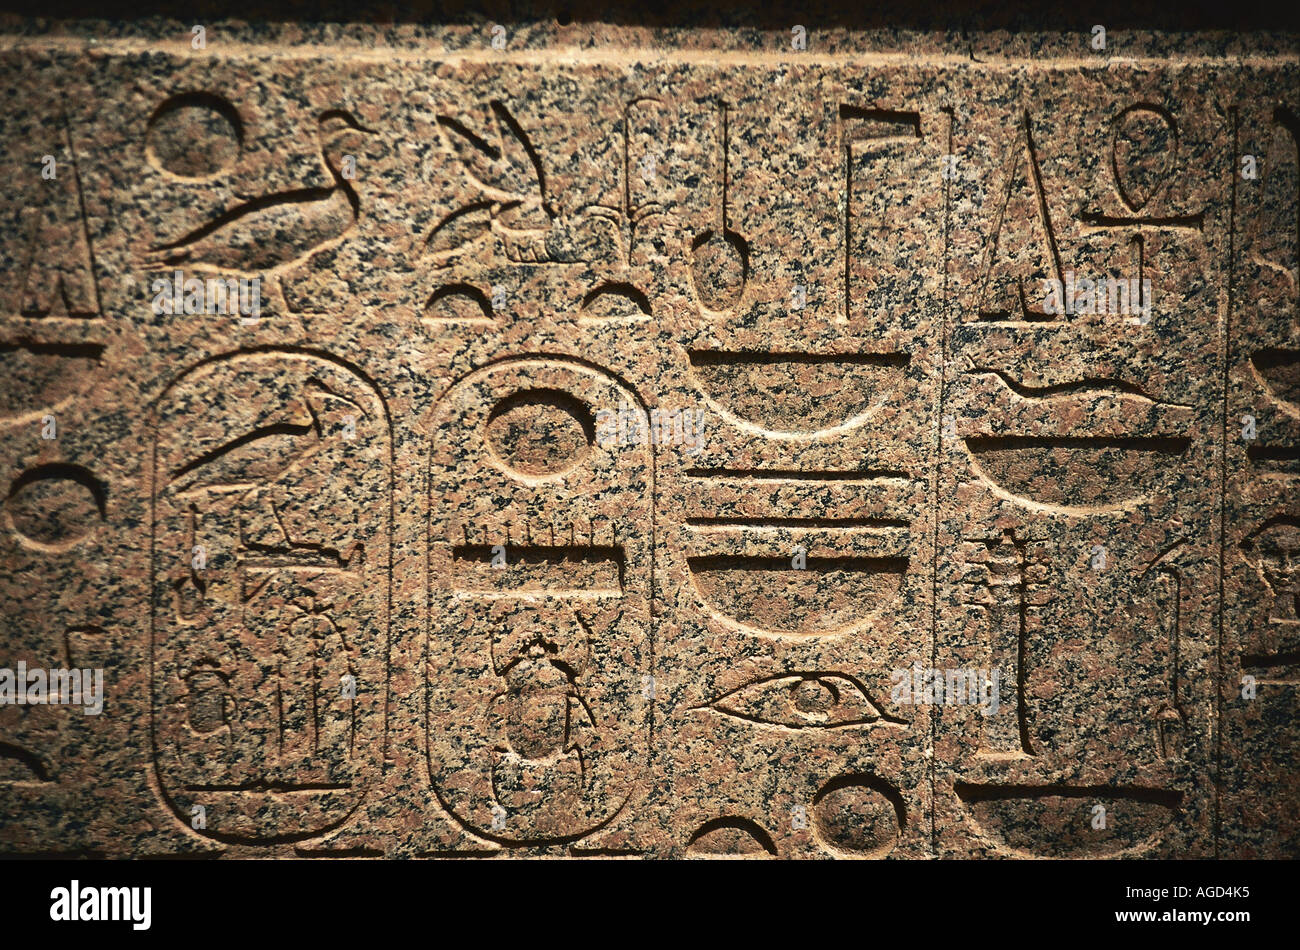 Detail of the relief carvings on a sarcophagus at Karnak showing detailed hieroglyphics Stock Photo